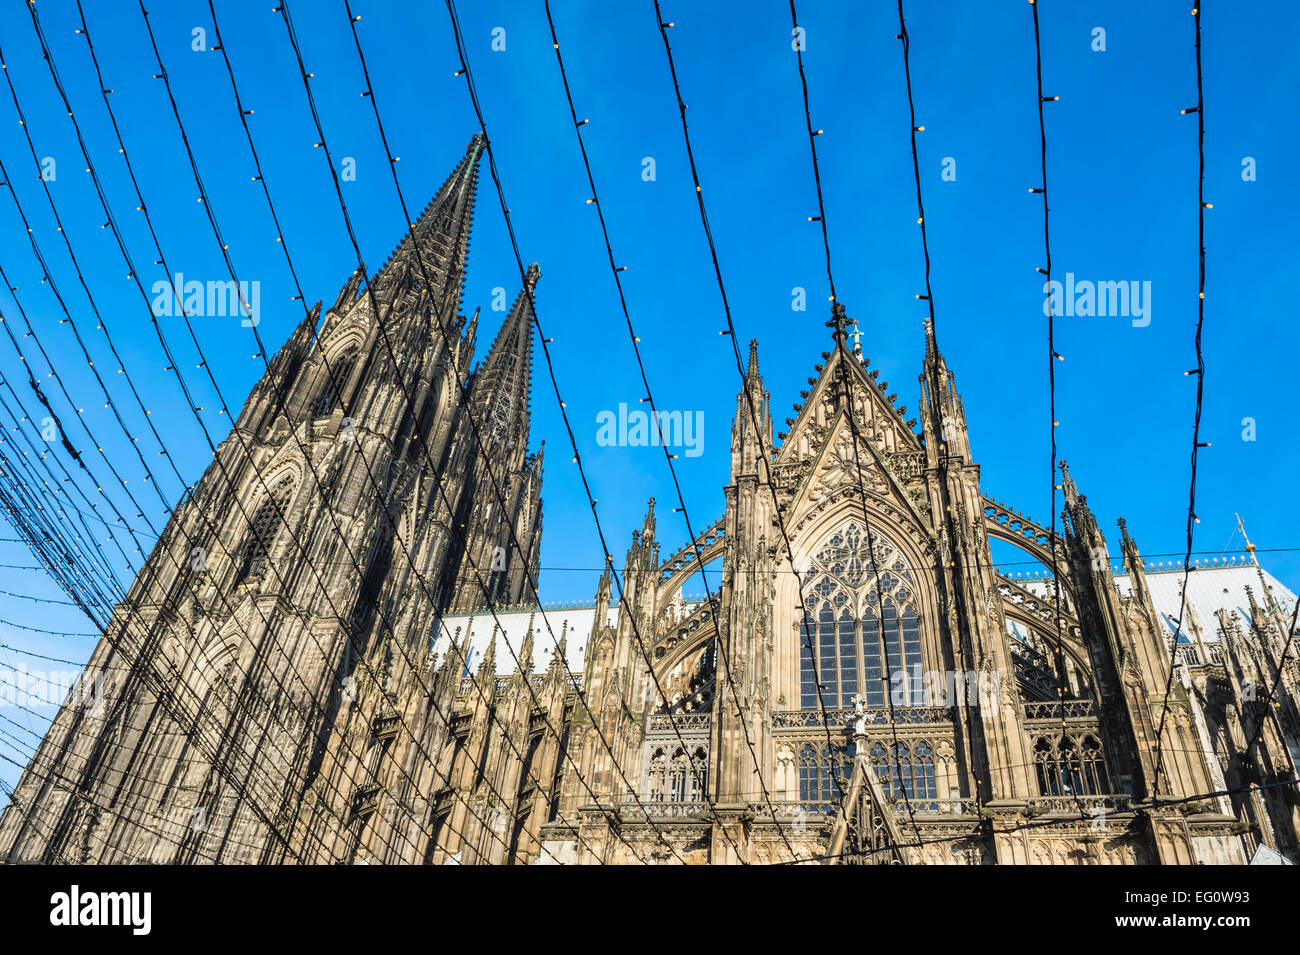 Cologne Cathedral seen through strings of lights, North Rhine Westphalia, Germany, Unesco World Heritage Site Stock Photo